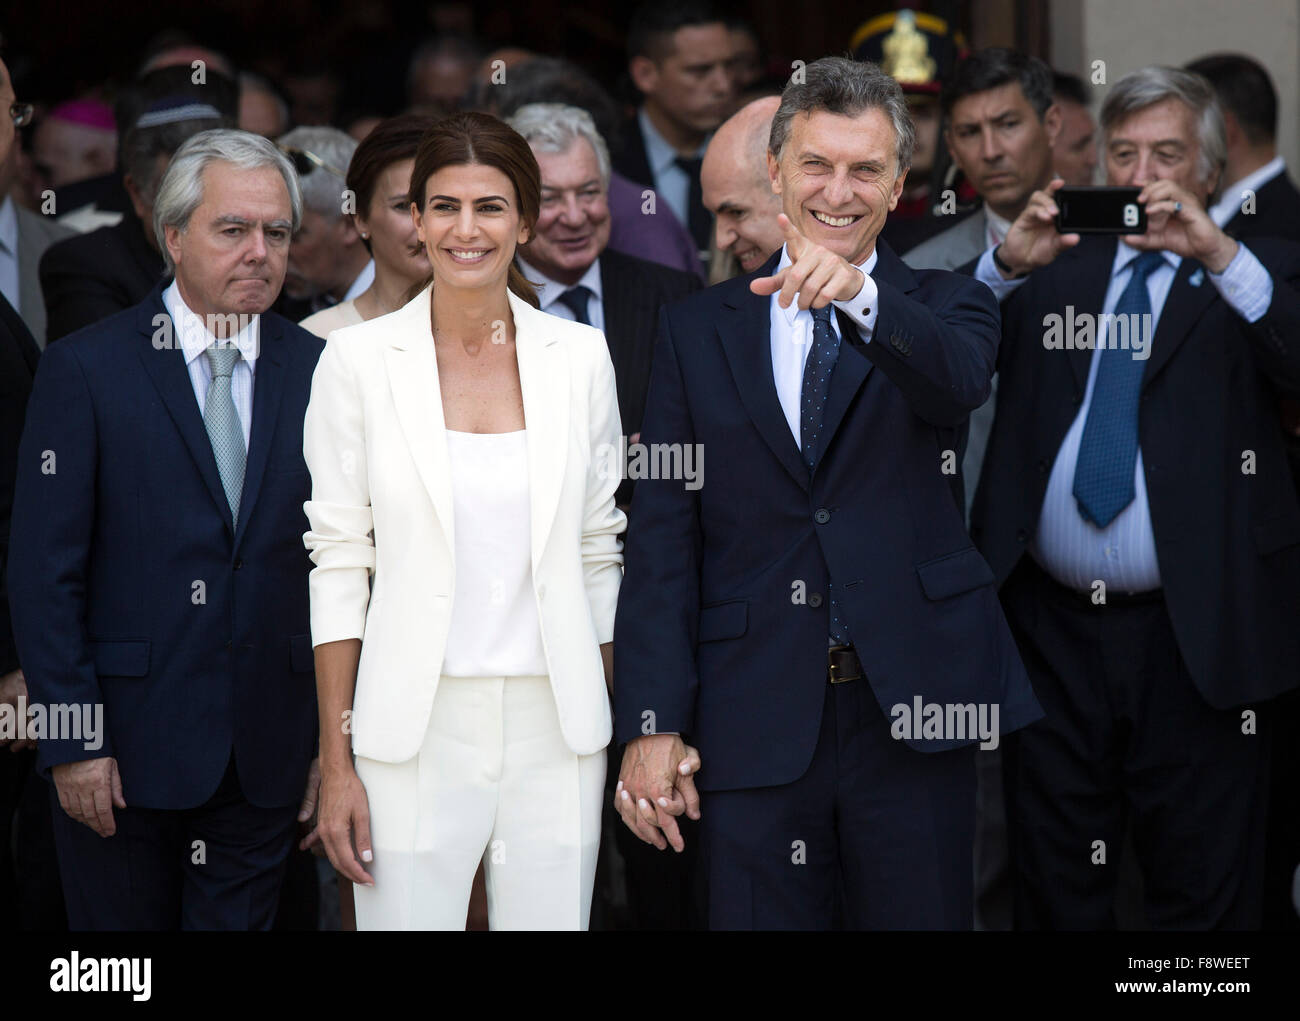 Buenos Aires, Argentina. 11th Dec, 2015. Argentina's President Mauricio Macri (2nd R) leaves with First Lady Juliana Awada (2nd L) after taking part in the Tedeum at the Metropolitan Cathedral in Buenos Aires, capital of Argentina, Dec. 11, 2015. According to local press, Mauricio Macri attended Friday with Argentina's Vice President Gabriela Michetti and his Cabinet the traditional religious service at the Metropolital Cathedral, one day after his pesidential inauguration. Credit:  Martin Zabala/Xinhua/Alamy Live News Stock Photo